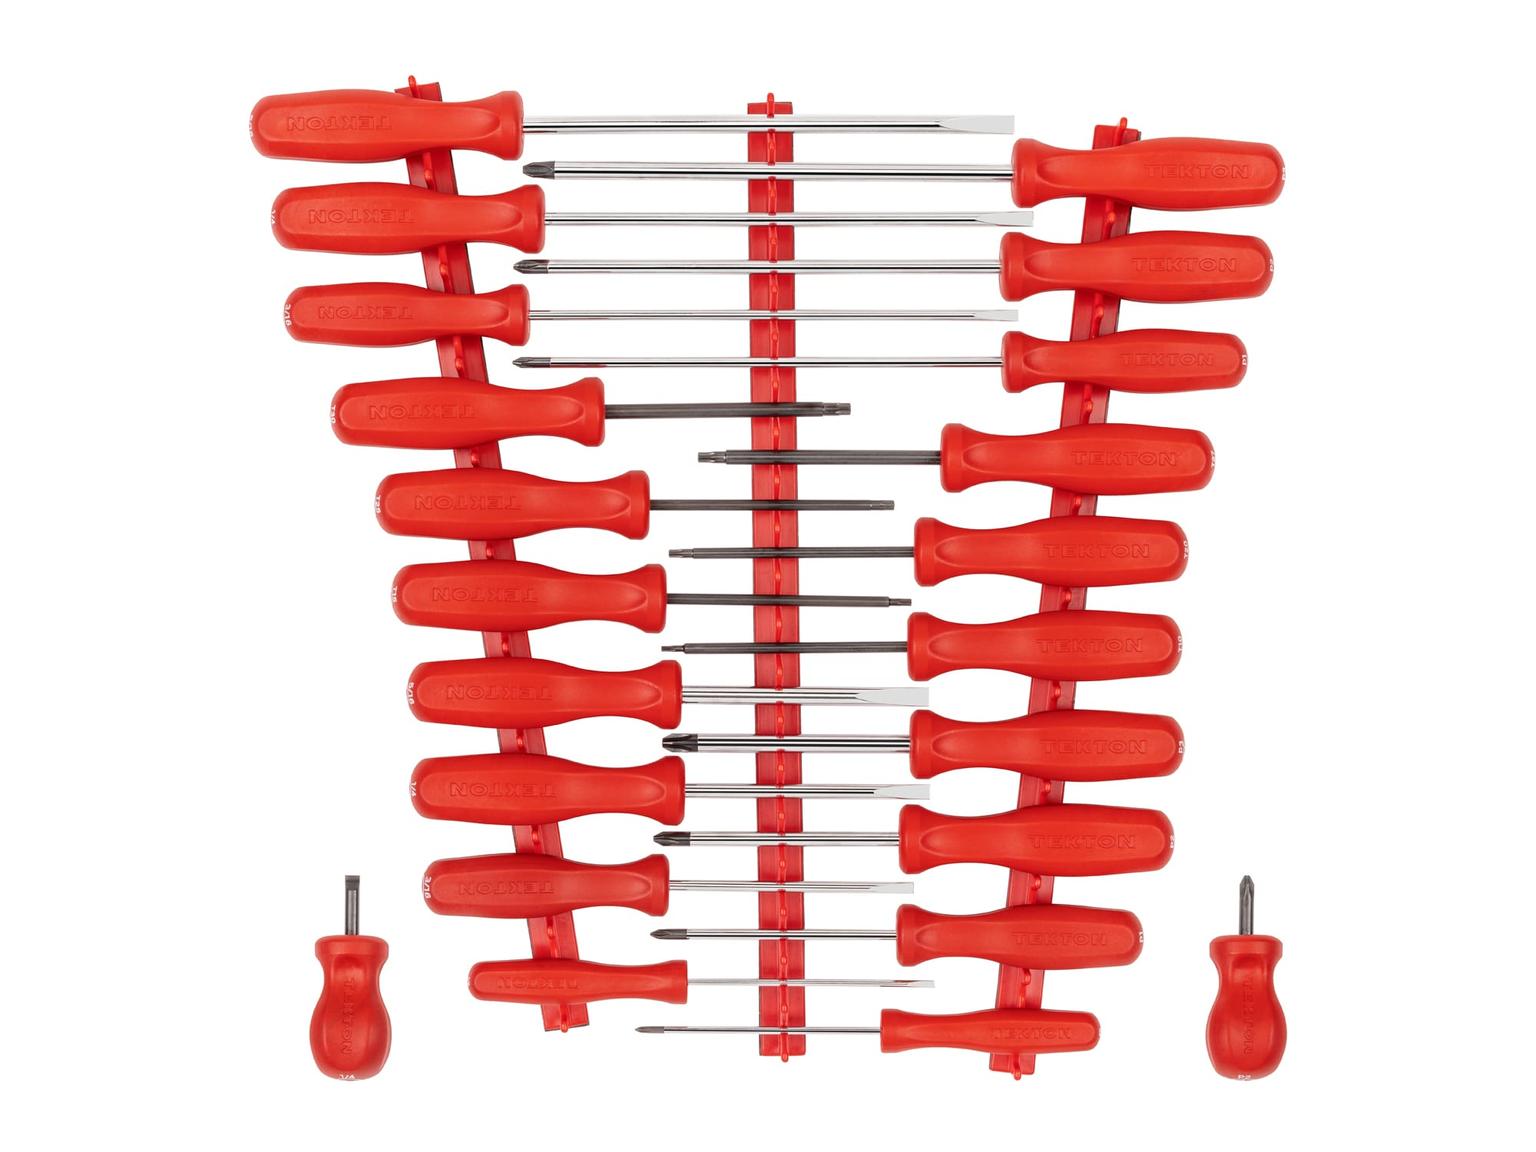 Hard Handle Screwdriver Set with Red Rails, 22-Piece (#0-#3, 1/8-5/16 in., T10-30)